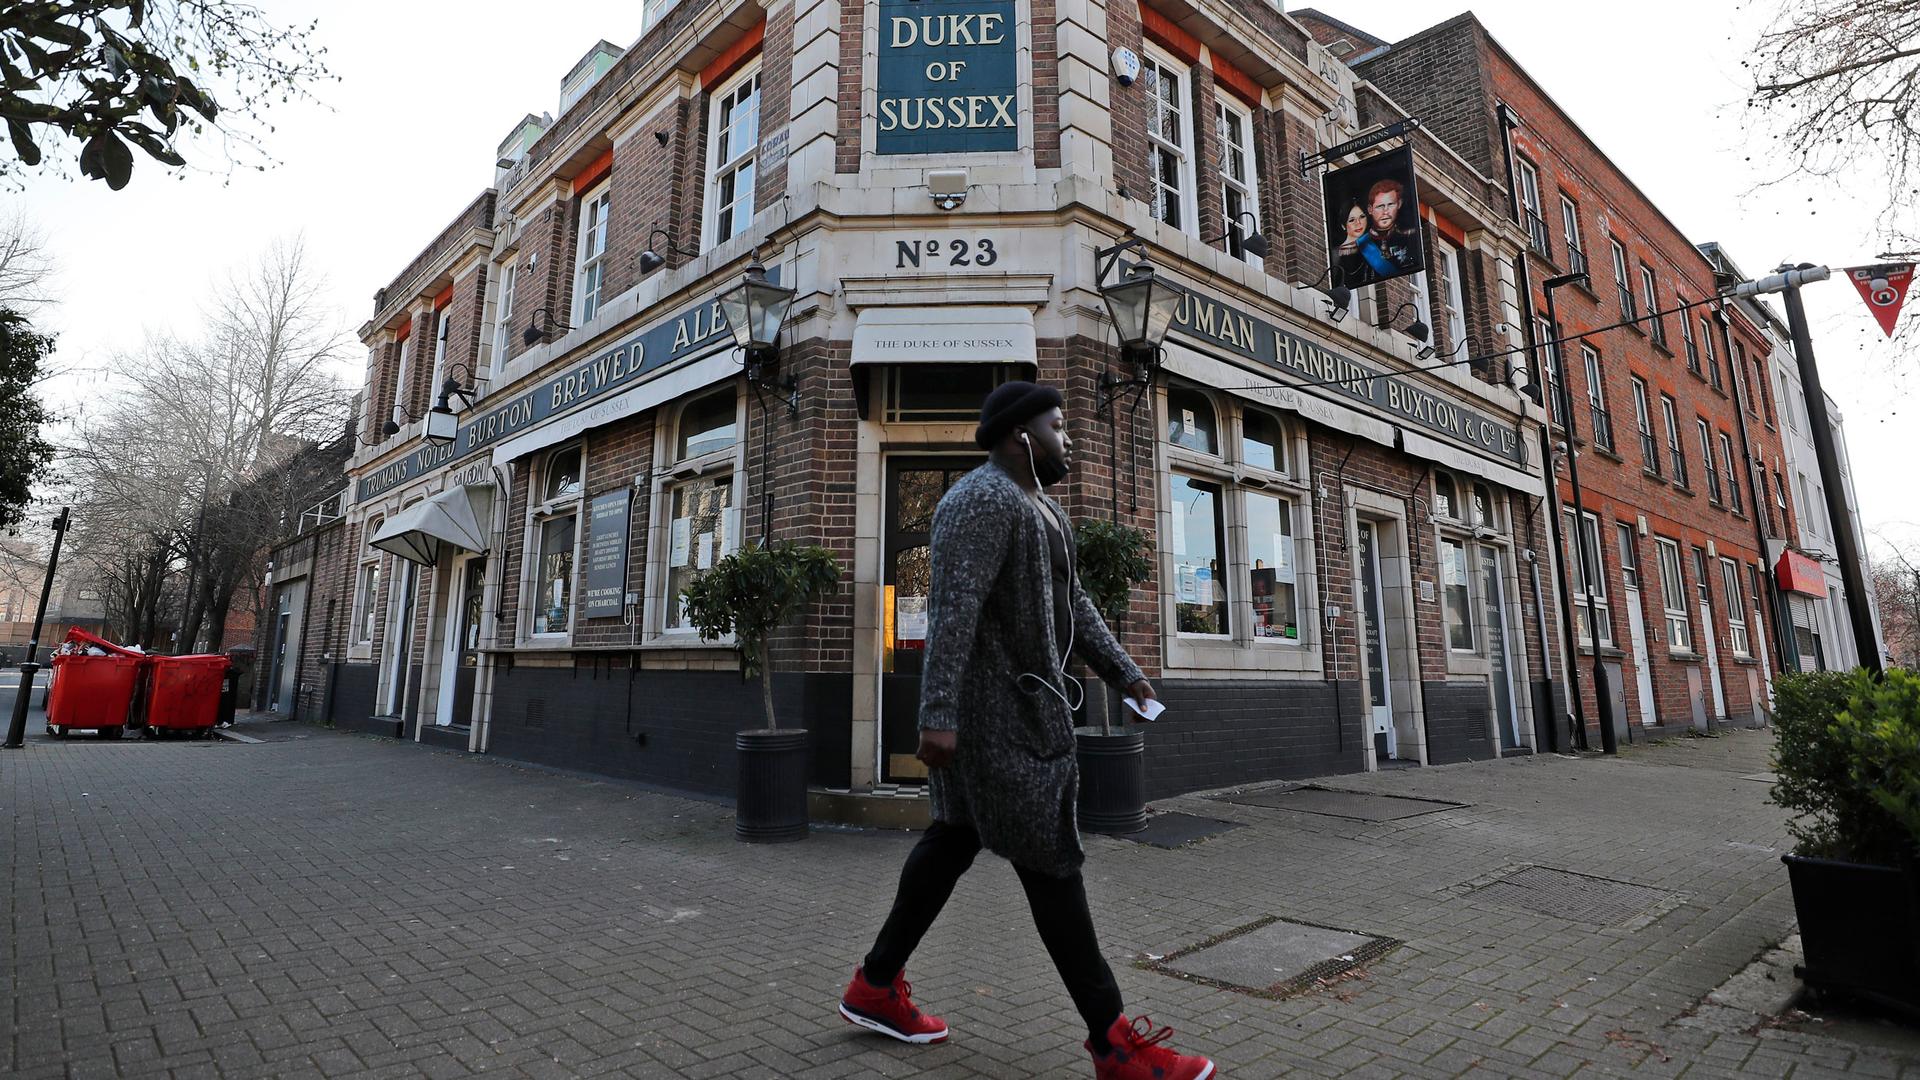 A man is shown with white headphones and read shoes walking past a pub called The Duke of Susex.